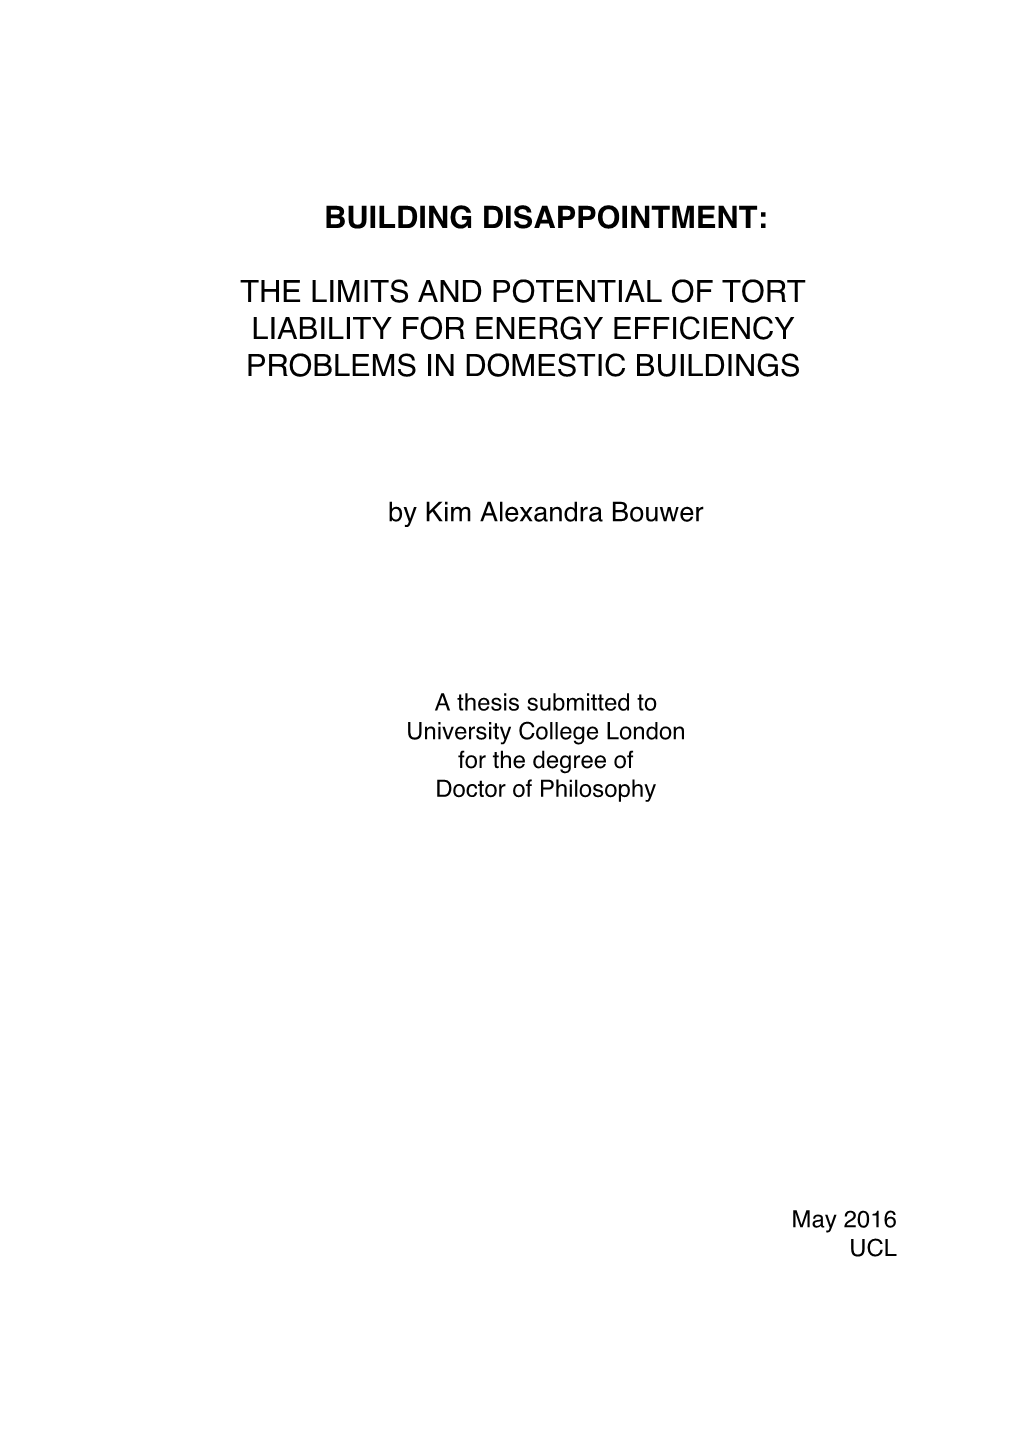 The Limits and Potential of Tort Liability for Energy Efficiency Problems in Domestic Buildings